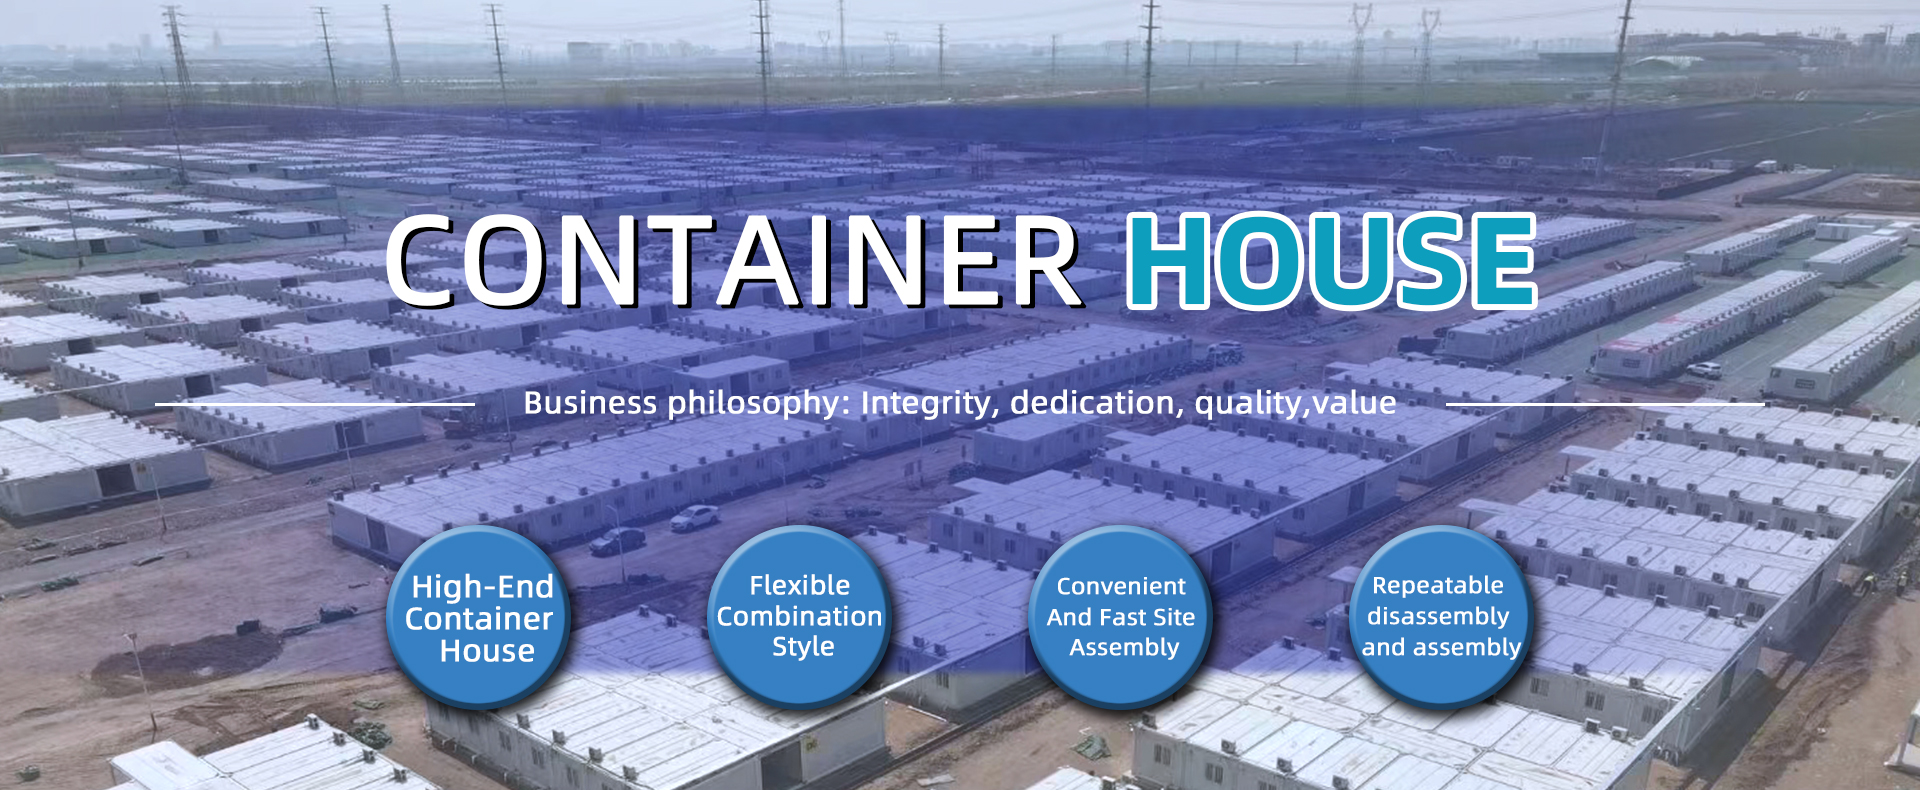 Container House Banner01